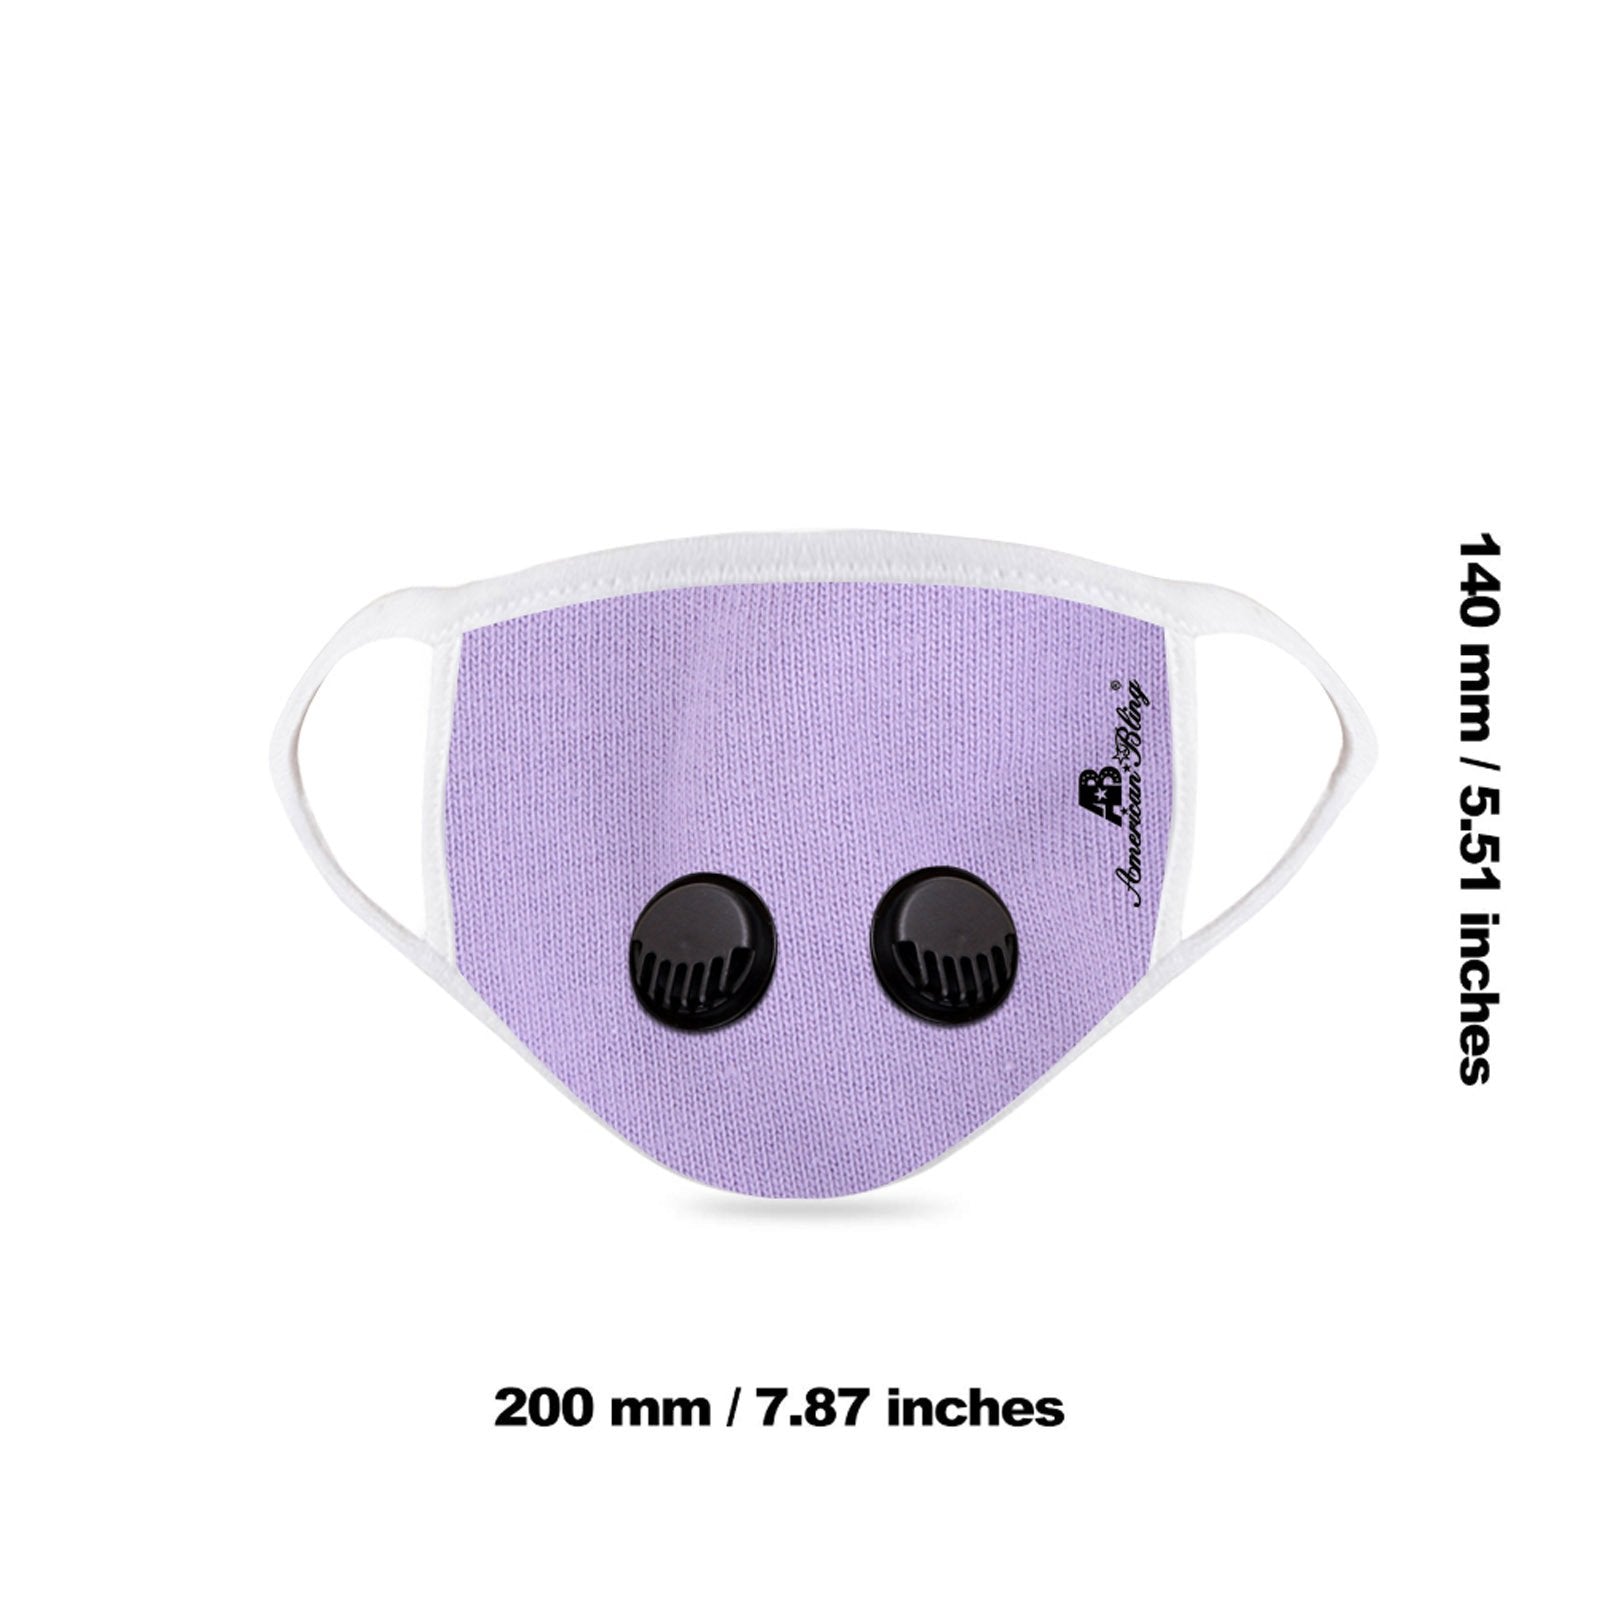 FCM-039DR American Bling Double Breathing Valve Fabric Face Mask Double Layer with Adjustable Nose Clip 1PC Pack